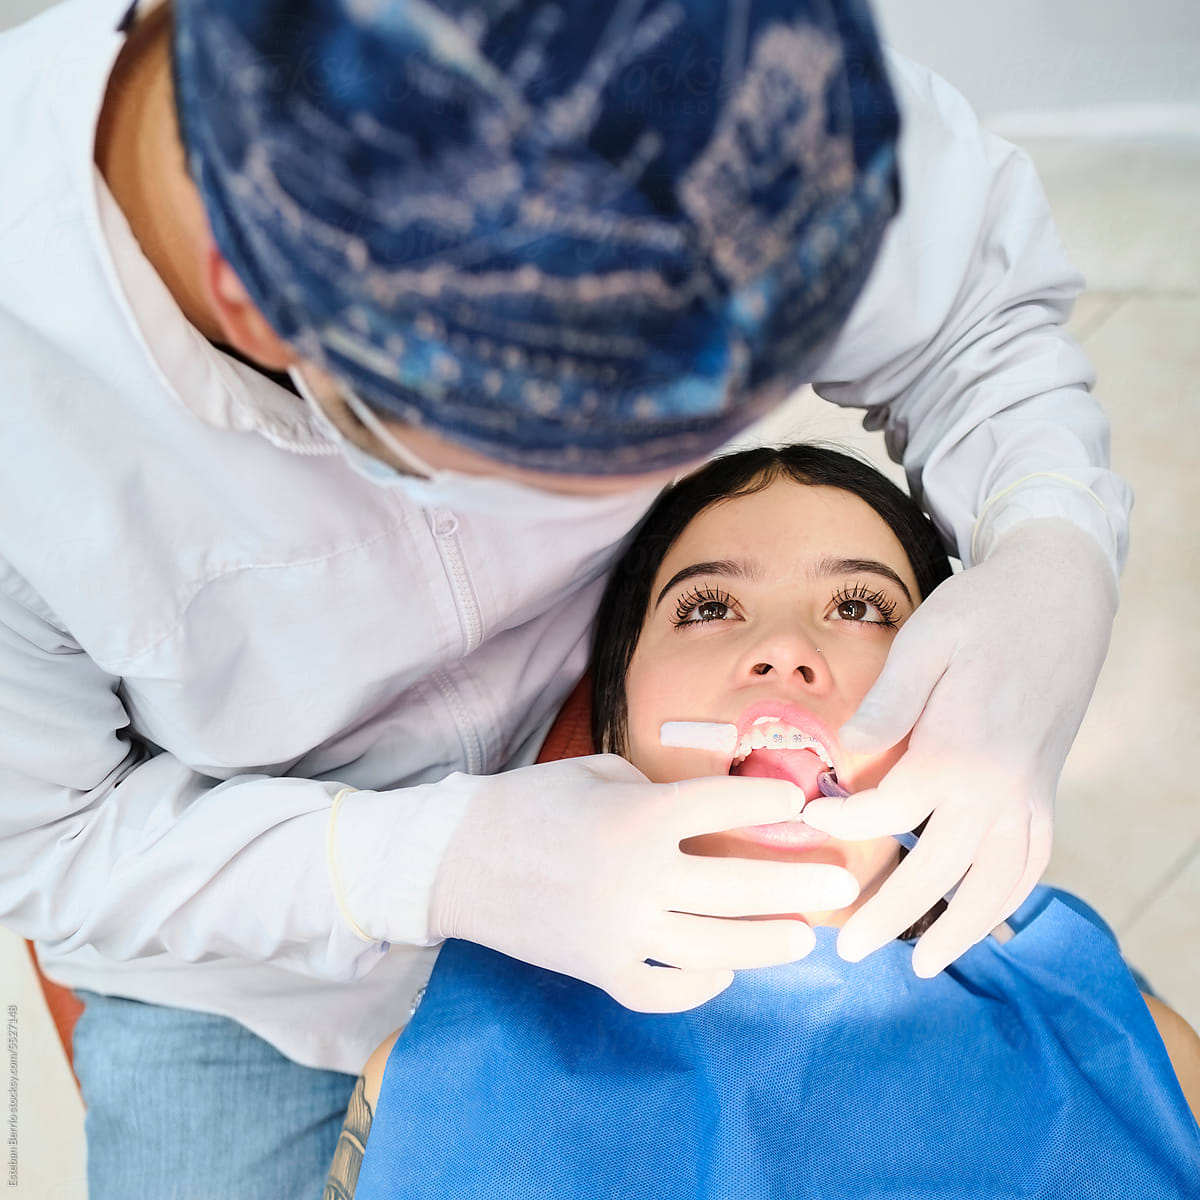 Patient and dentist in a dental intervention